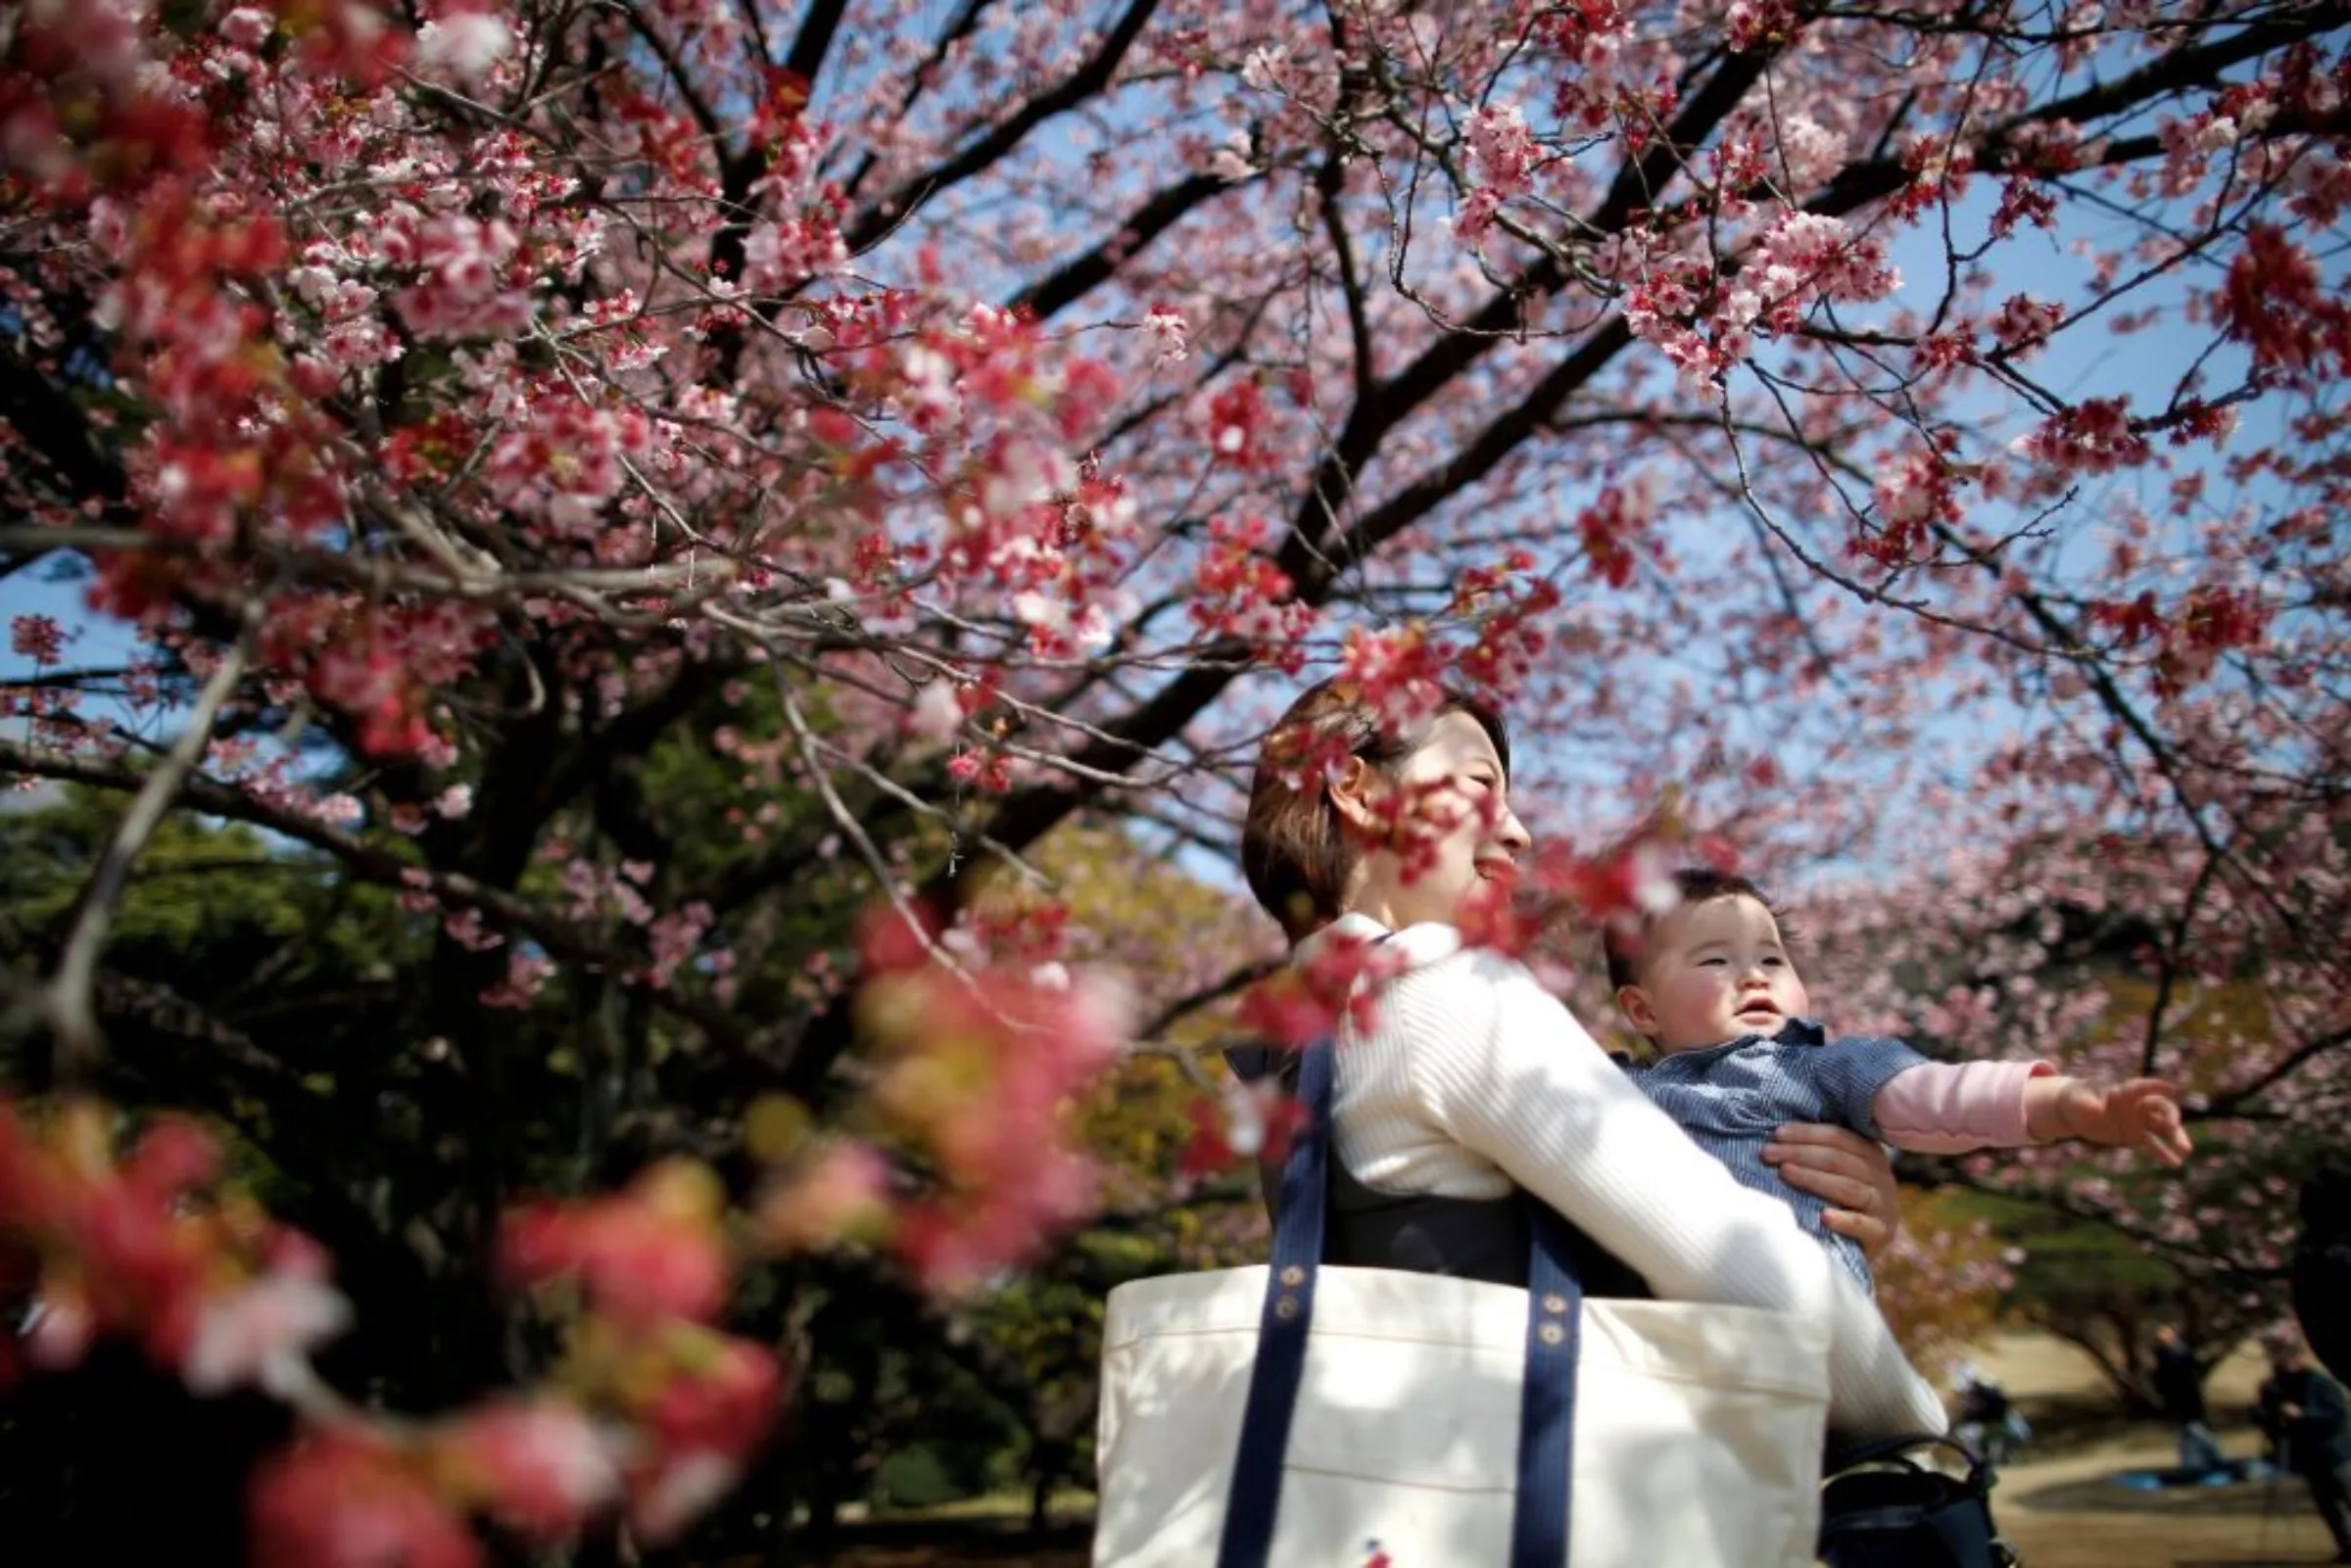 A seven-month-old baby and her mother look at early flowering Kanzakura cherry blossoms in full bloom at the Shinjuku Gyoen National Garden in Tokyo, Japan March 14, 2018